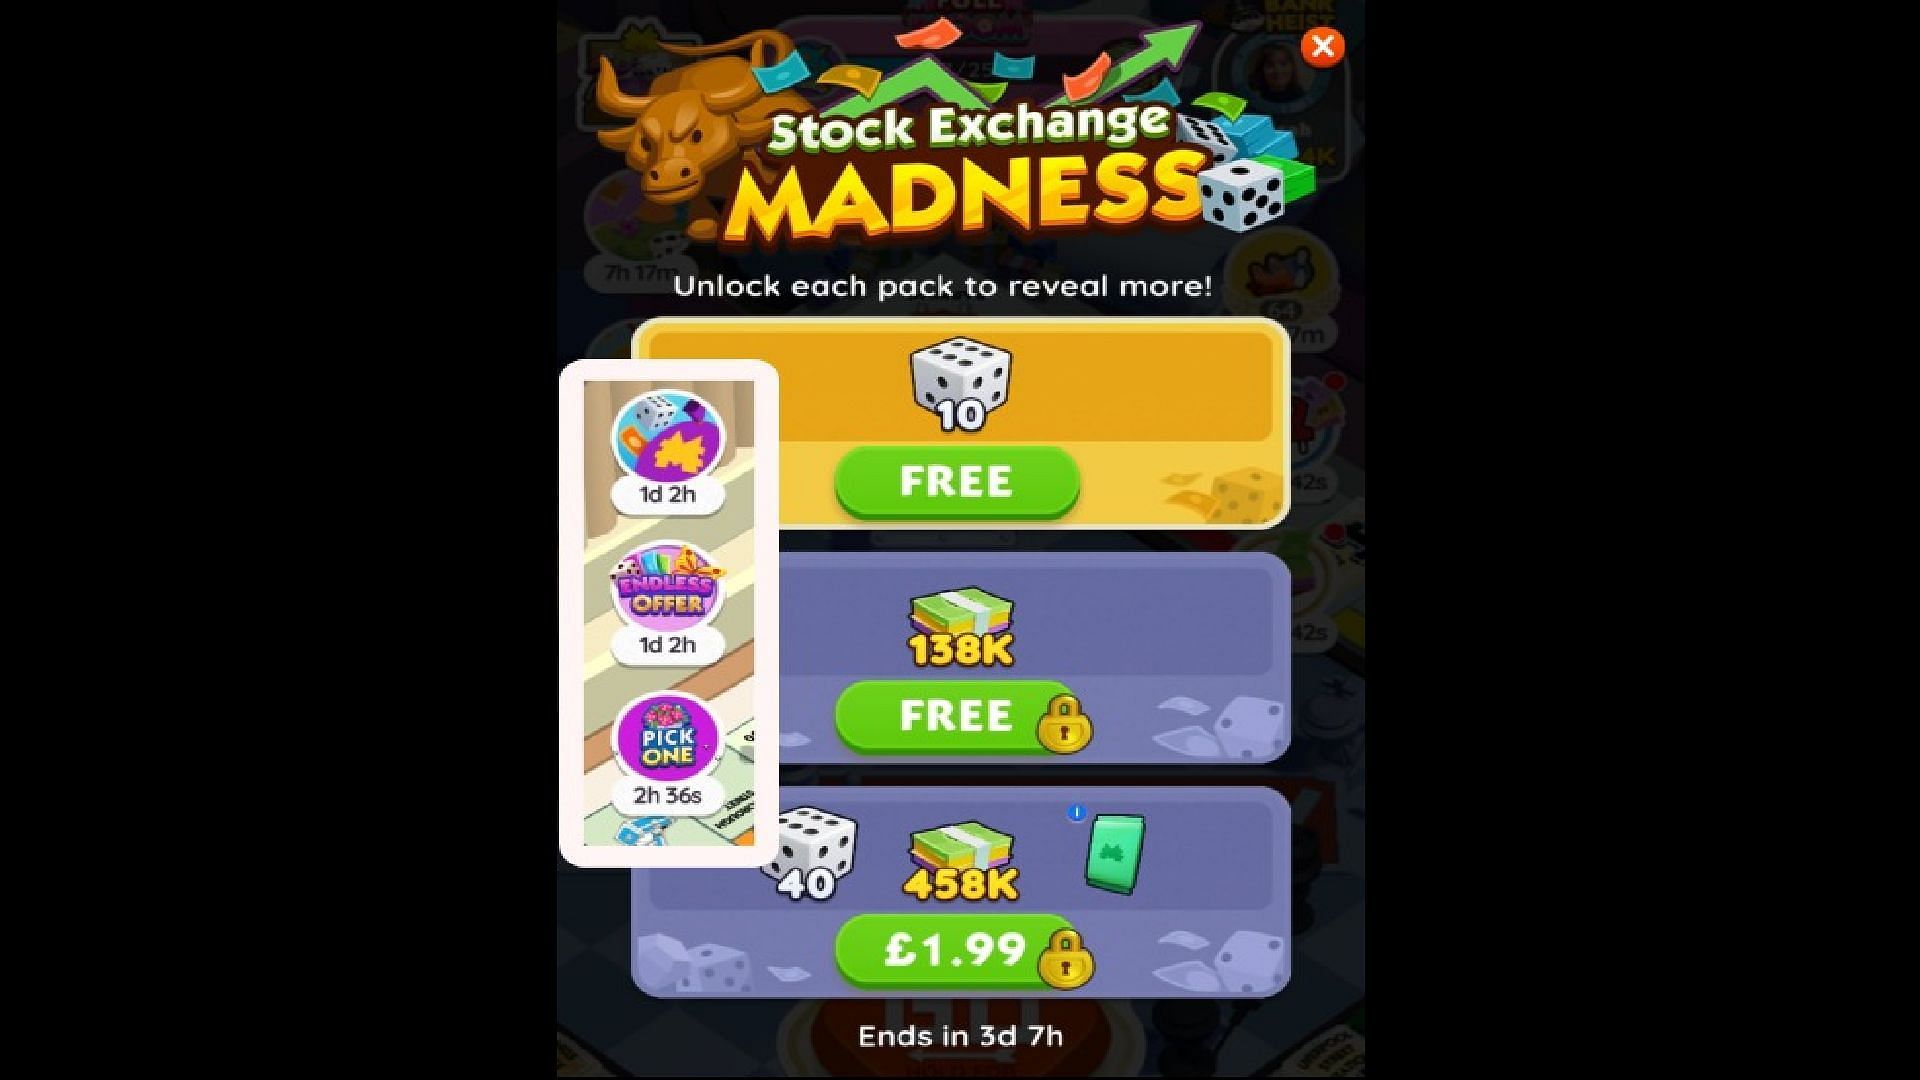 Endless deals like these can help you earn tokens for free (Image via Scopely)